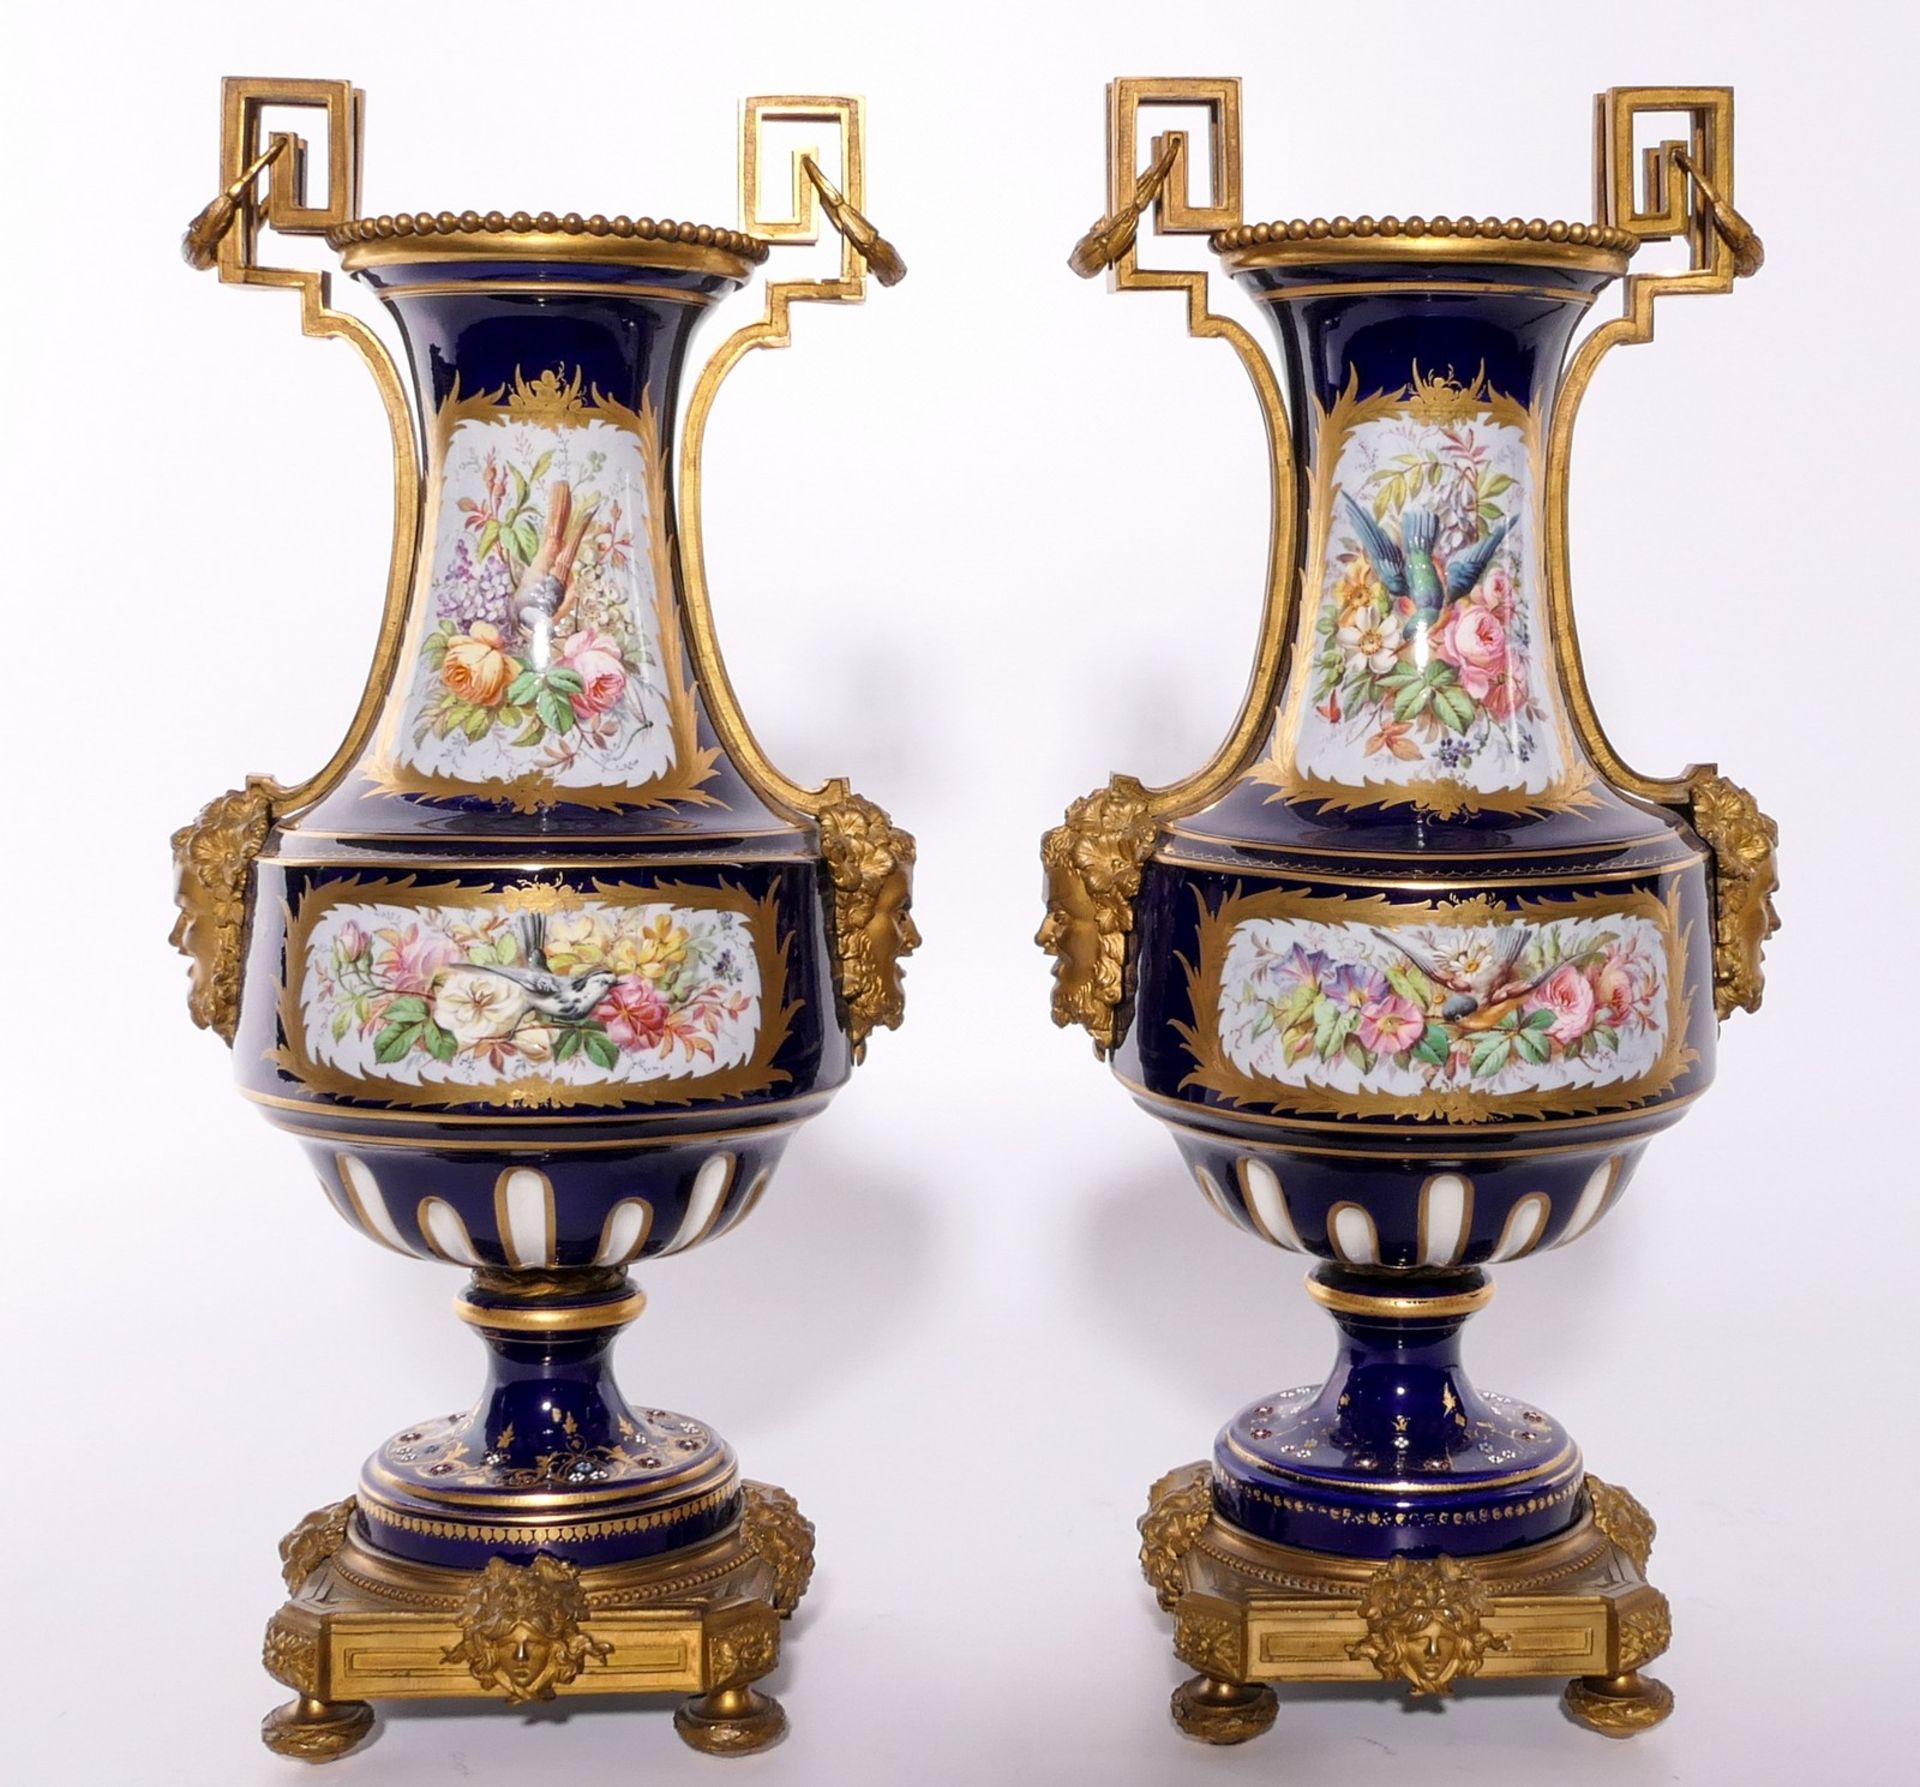 A pair of Neoclassical vases in Sèvres-porcelain, blue royale ground, the front with gilt cartouches - Image 3 of 11